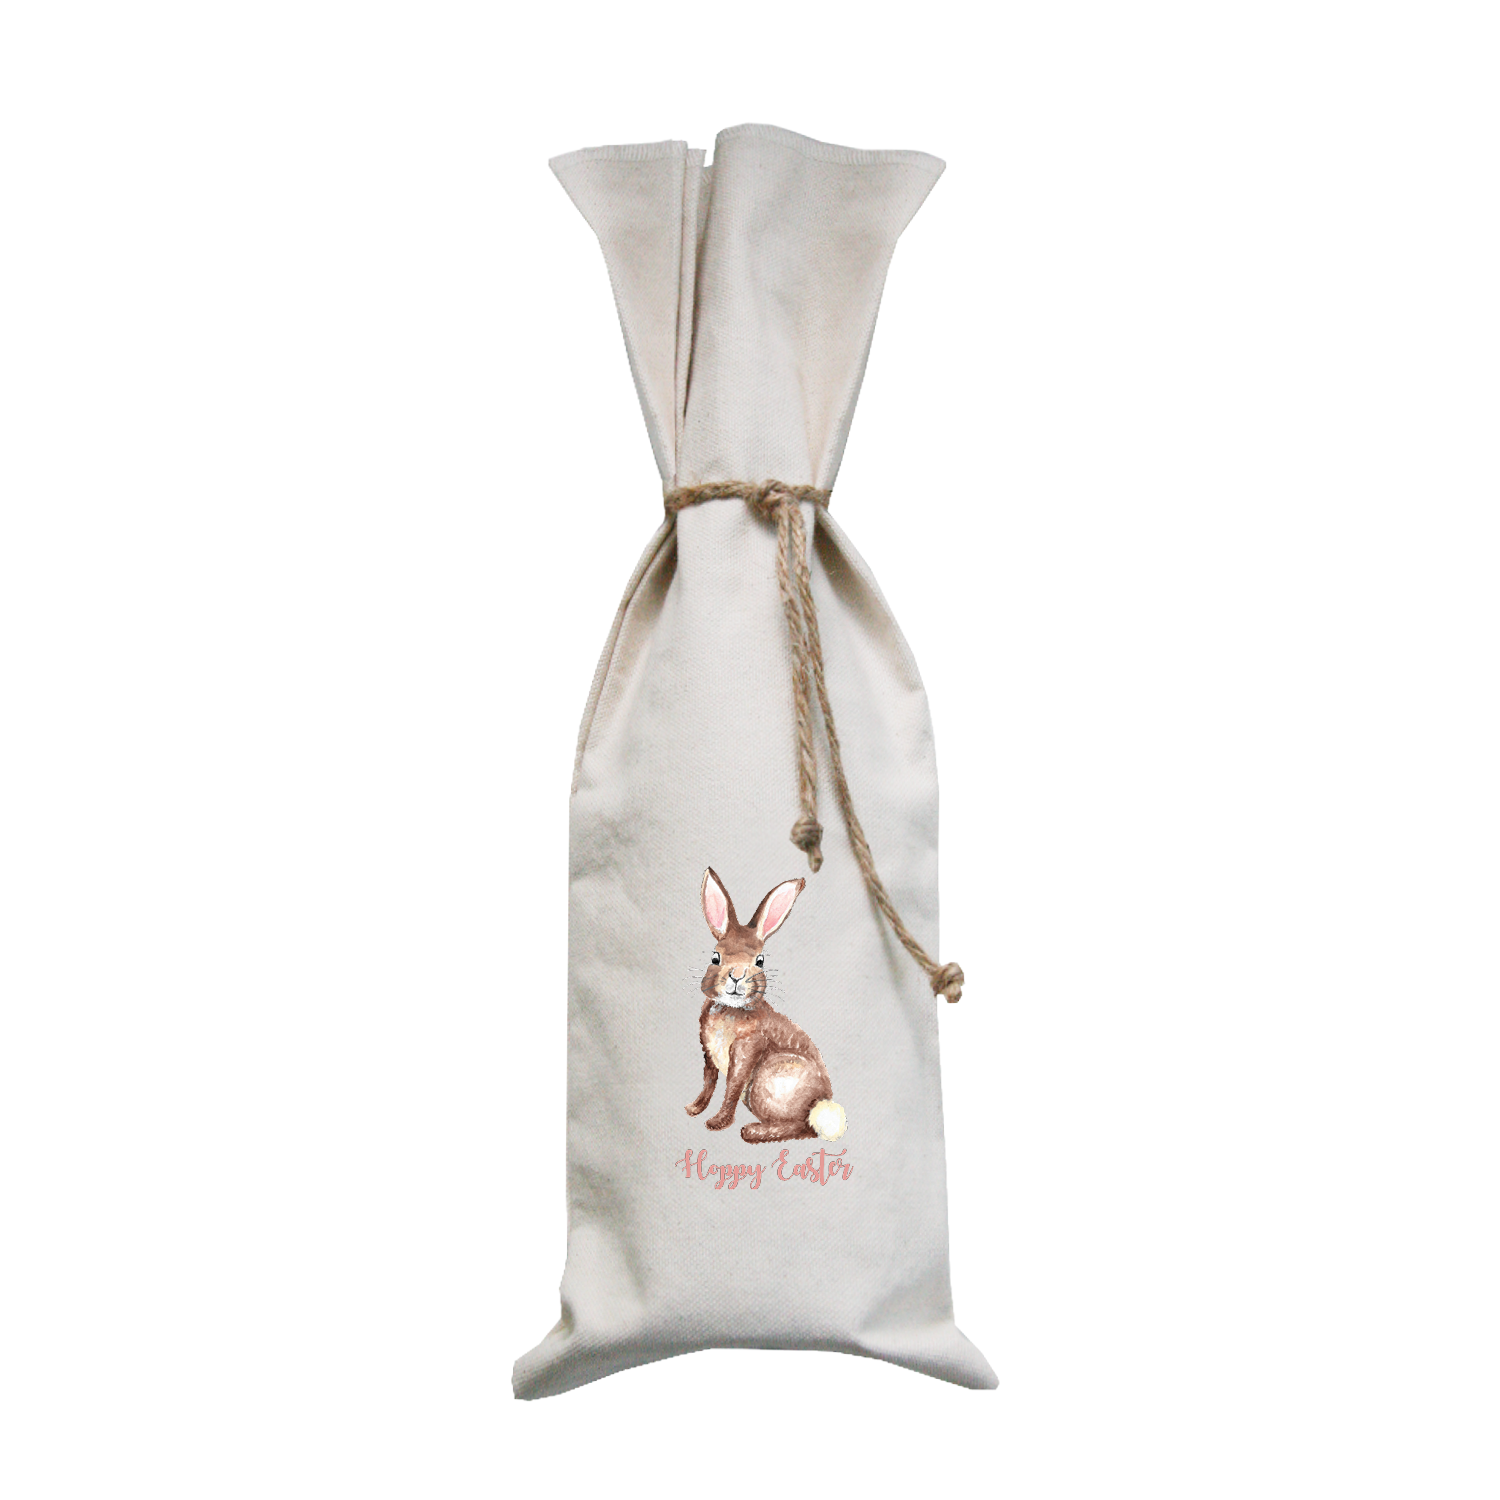 brown bunny with hoppy easter wine bag